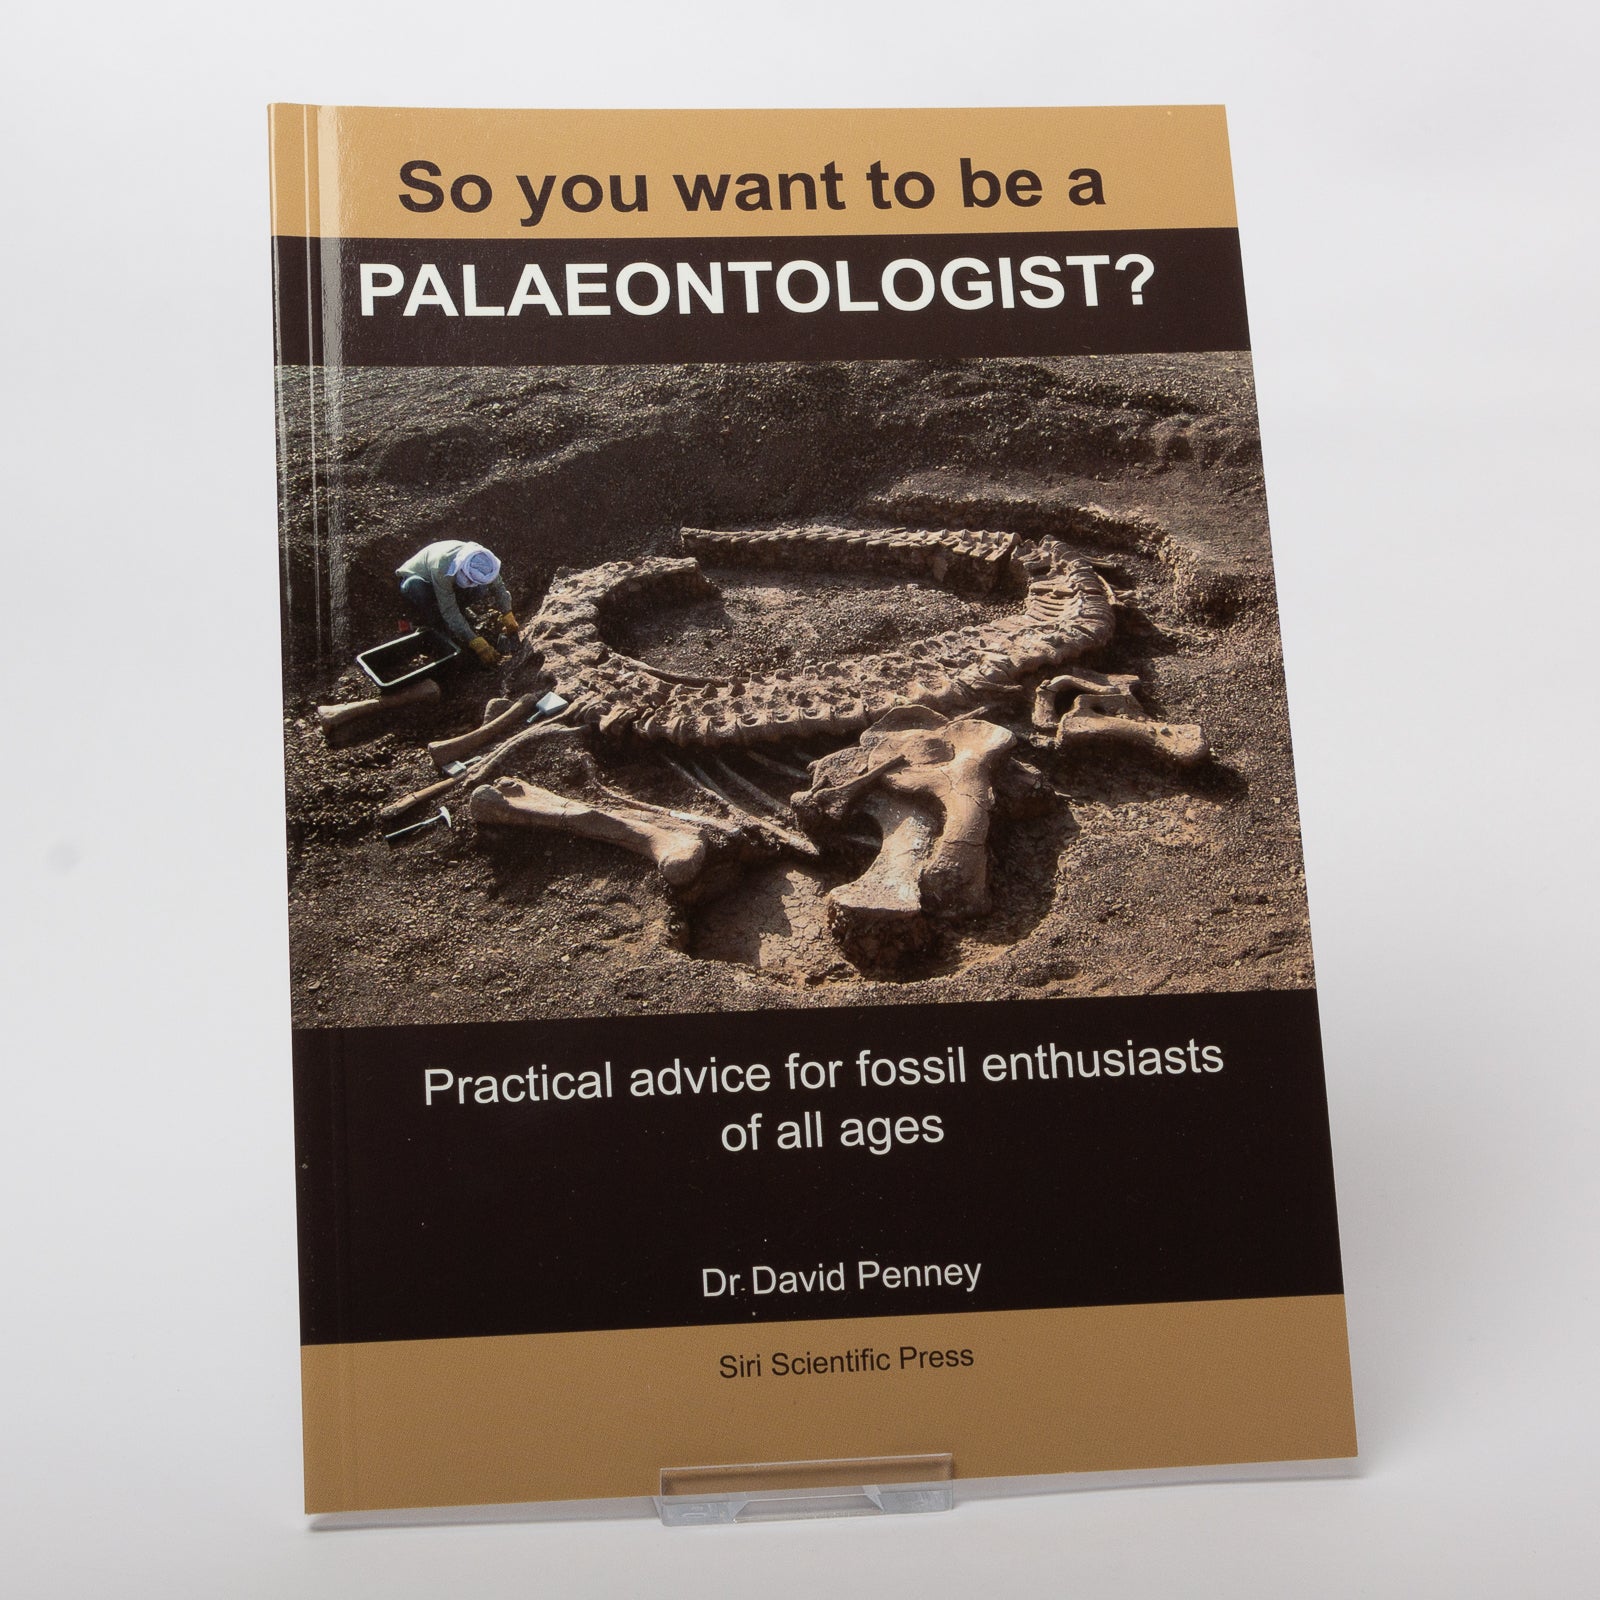 So you want to be a Palaeontologist